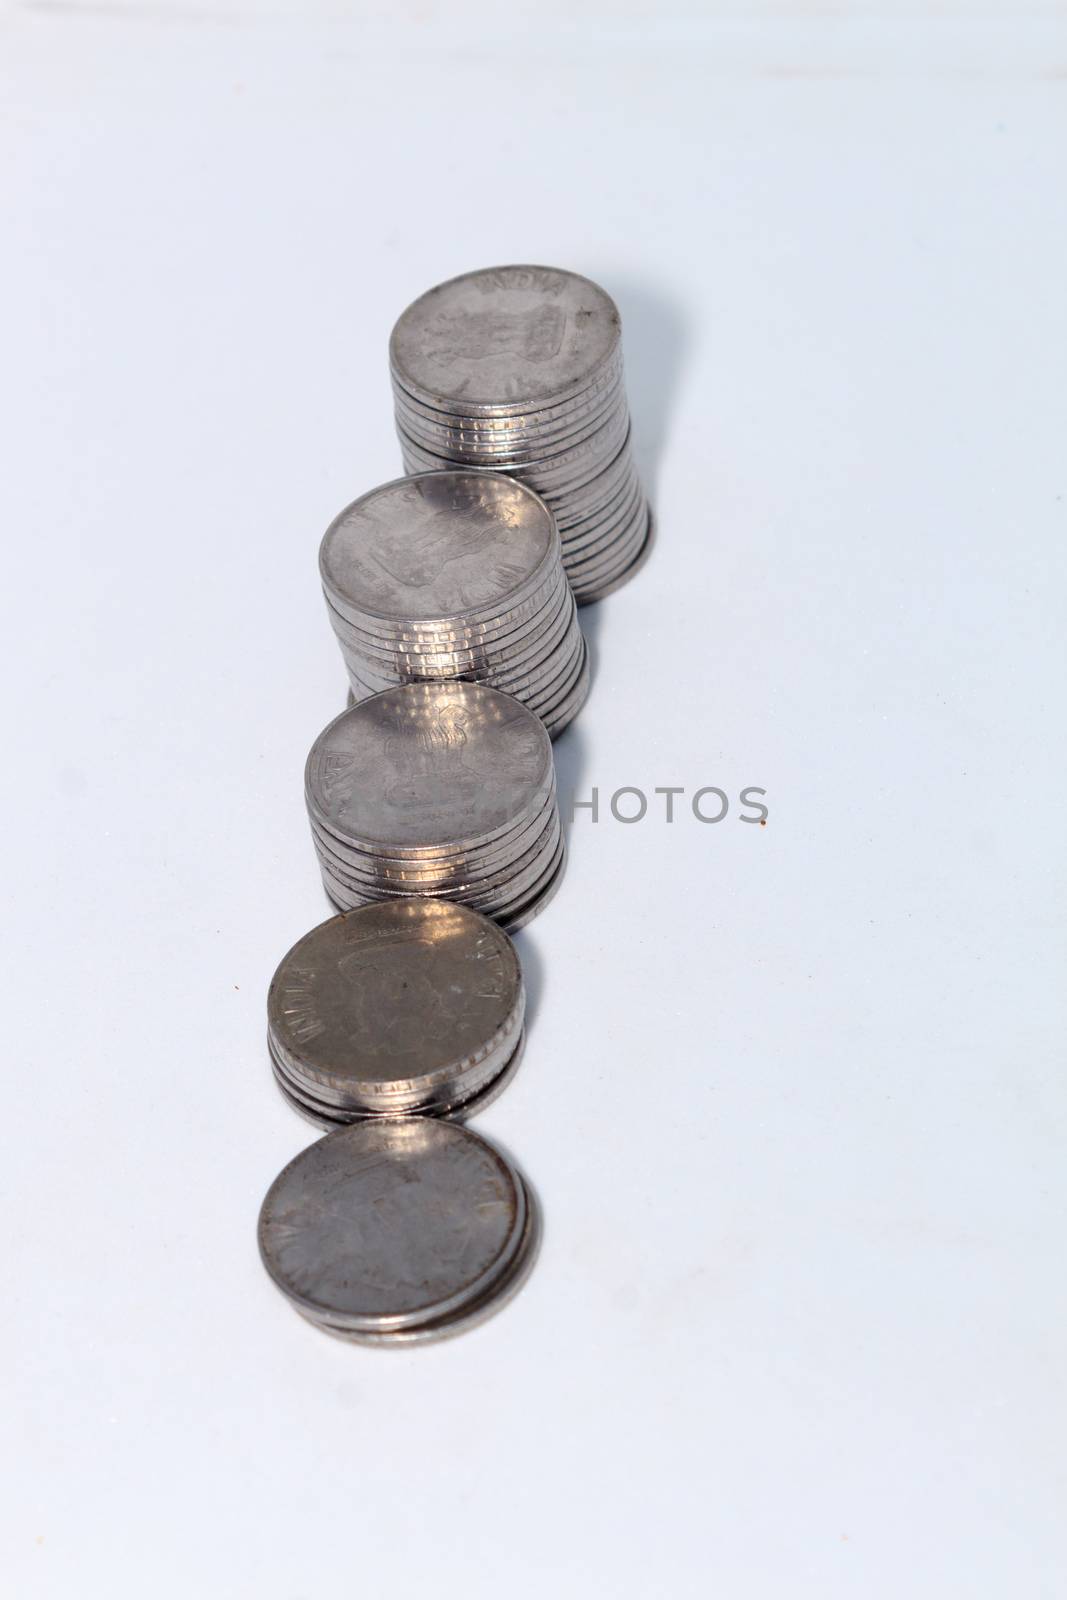 Stock pile 2 two Indian rupee metal coin currency on isolated white background. Financial, economy, investment growth concept. Banking and exchange object. closeup. by sudiptabhowmick